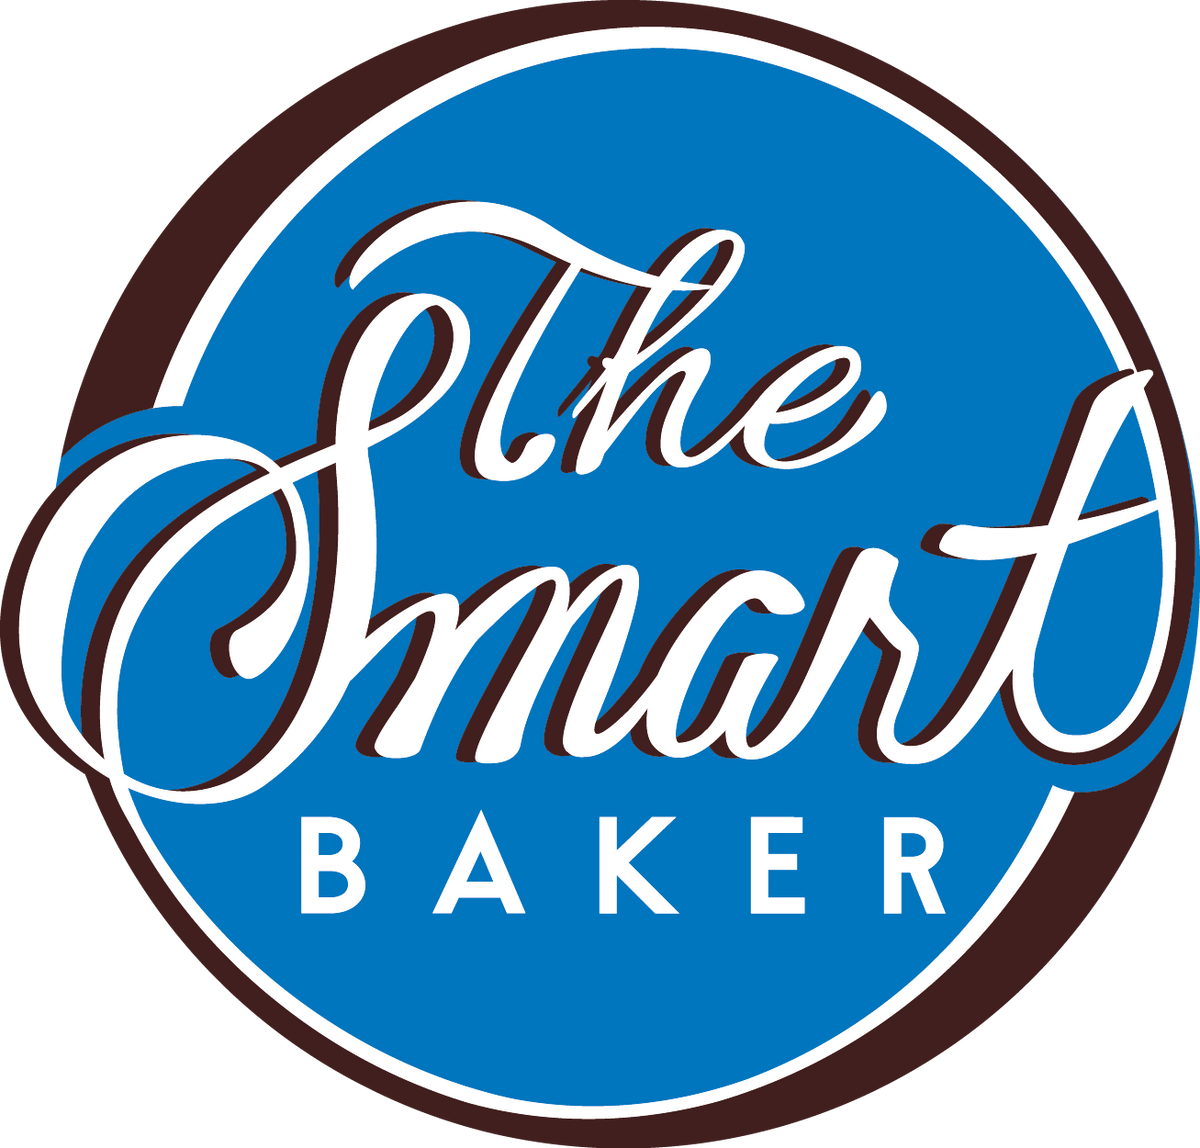 Here's What Happened To The Smart Baker After Shark Tank